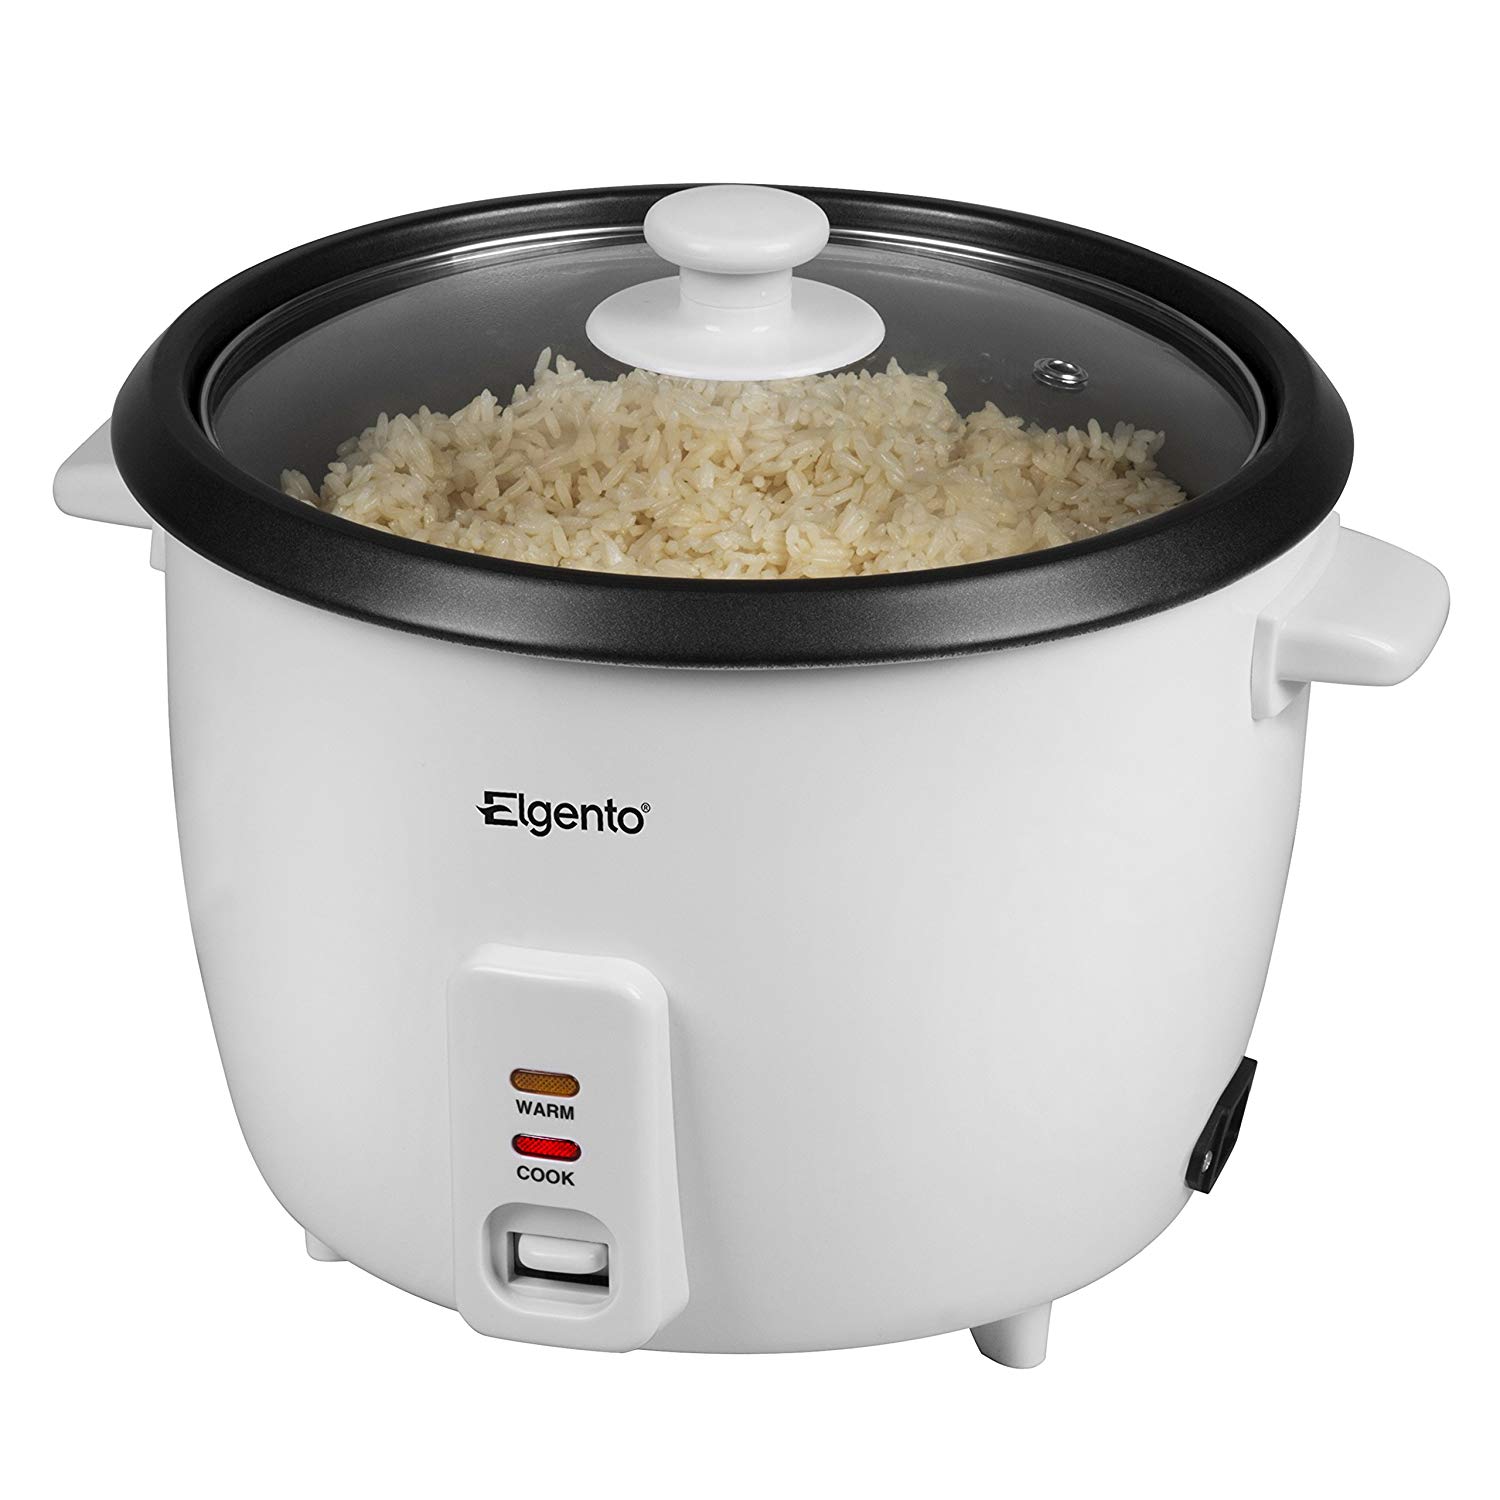 Elgento E19013 Rice Cooker 0 6 Litre Cooked Rice Capacity White 1 5